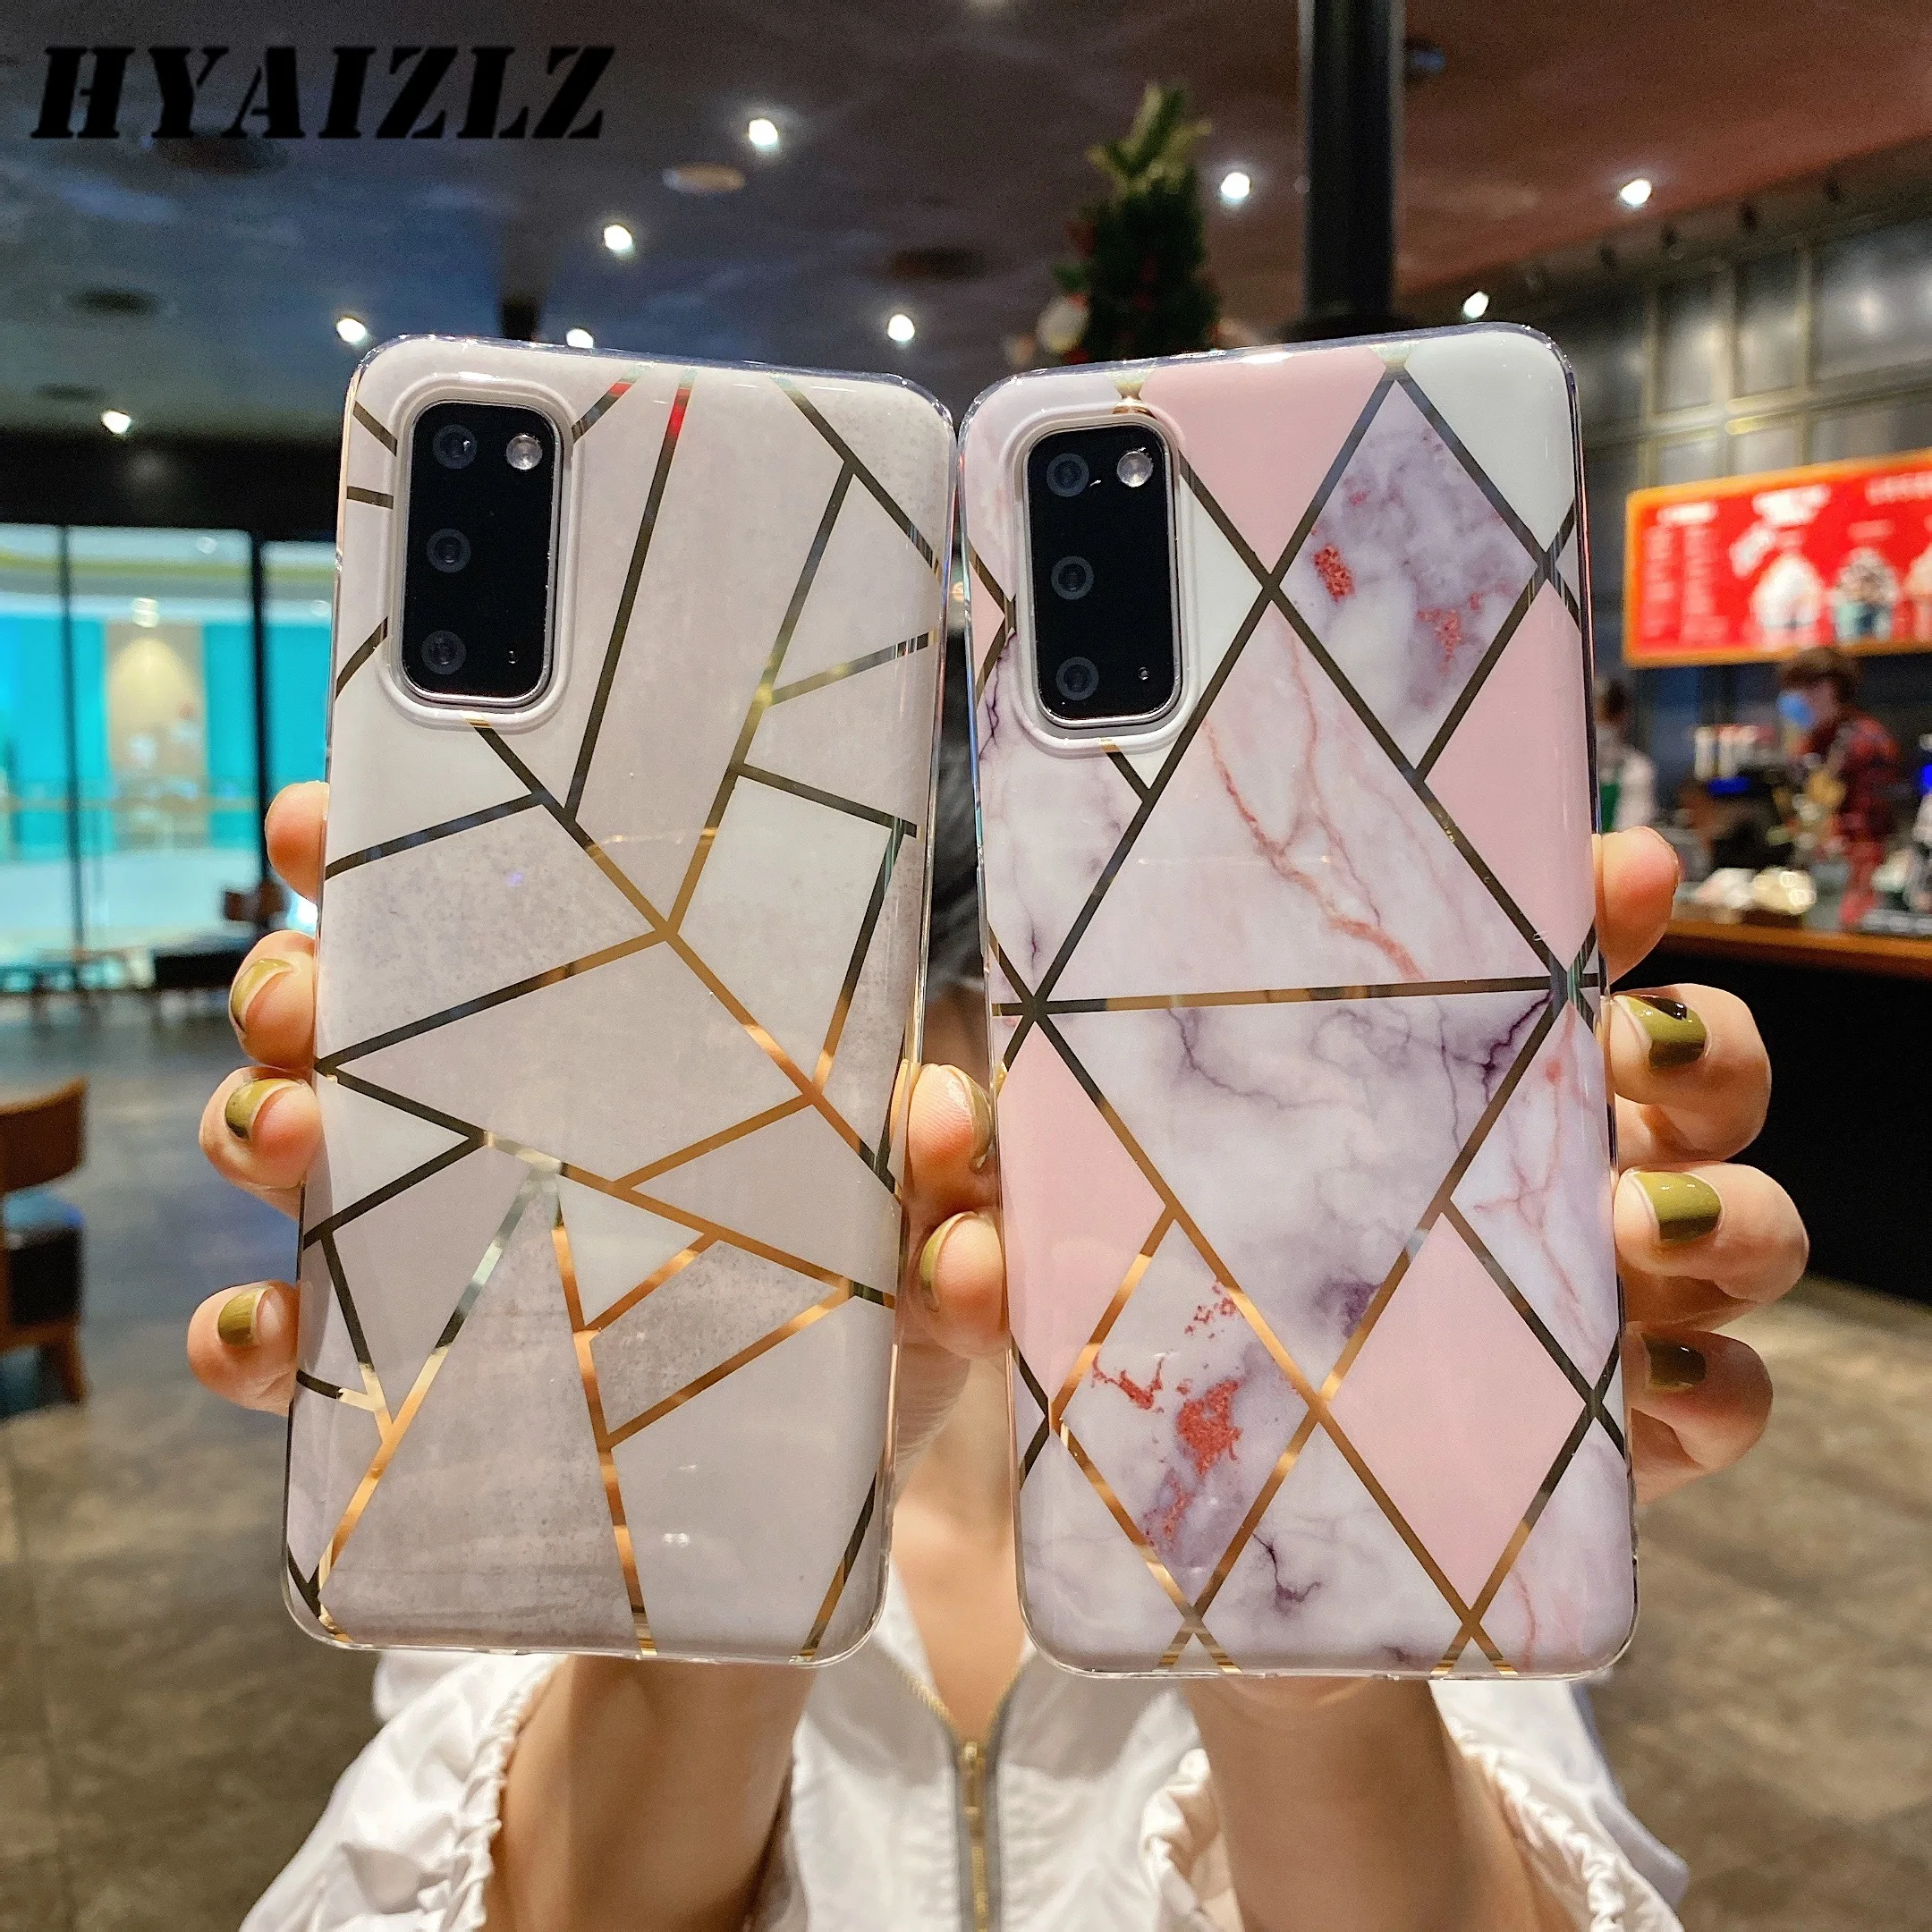 

Geometric Case for Samsung Galaxy S20 FE S21 Note 10 20 Ultra S10 S9 Plus A31 A41 A70 A51 A71 A21S A50 A30S A20 Soft IMD Cover